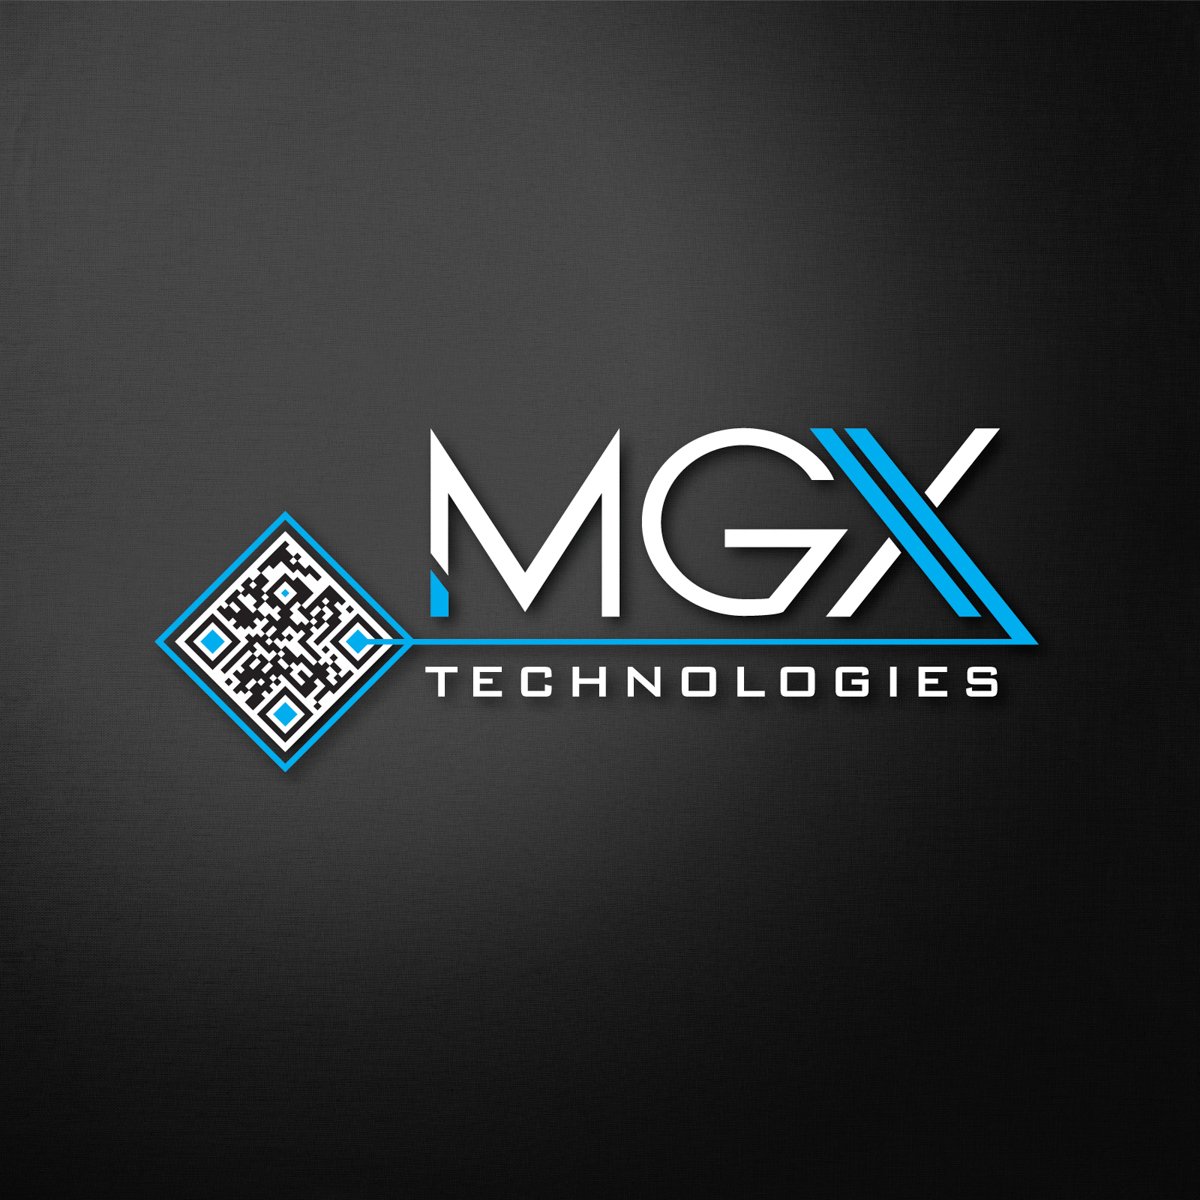 Seconday logo mark for MGX.